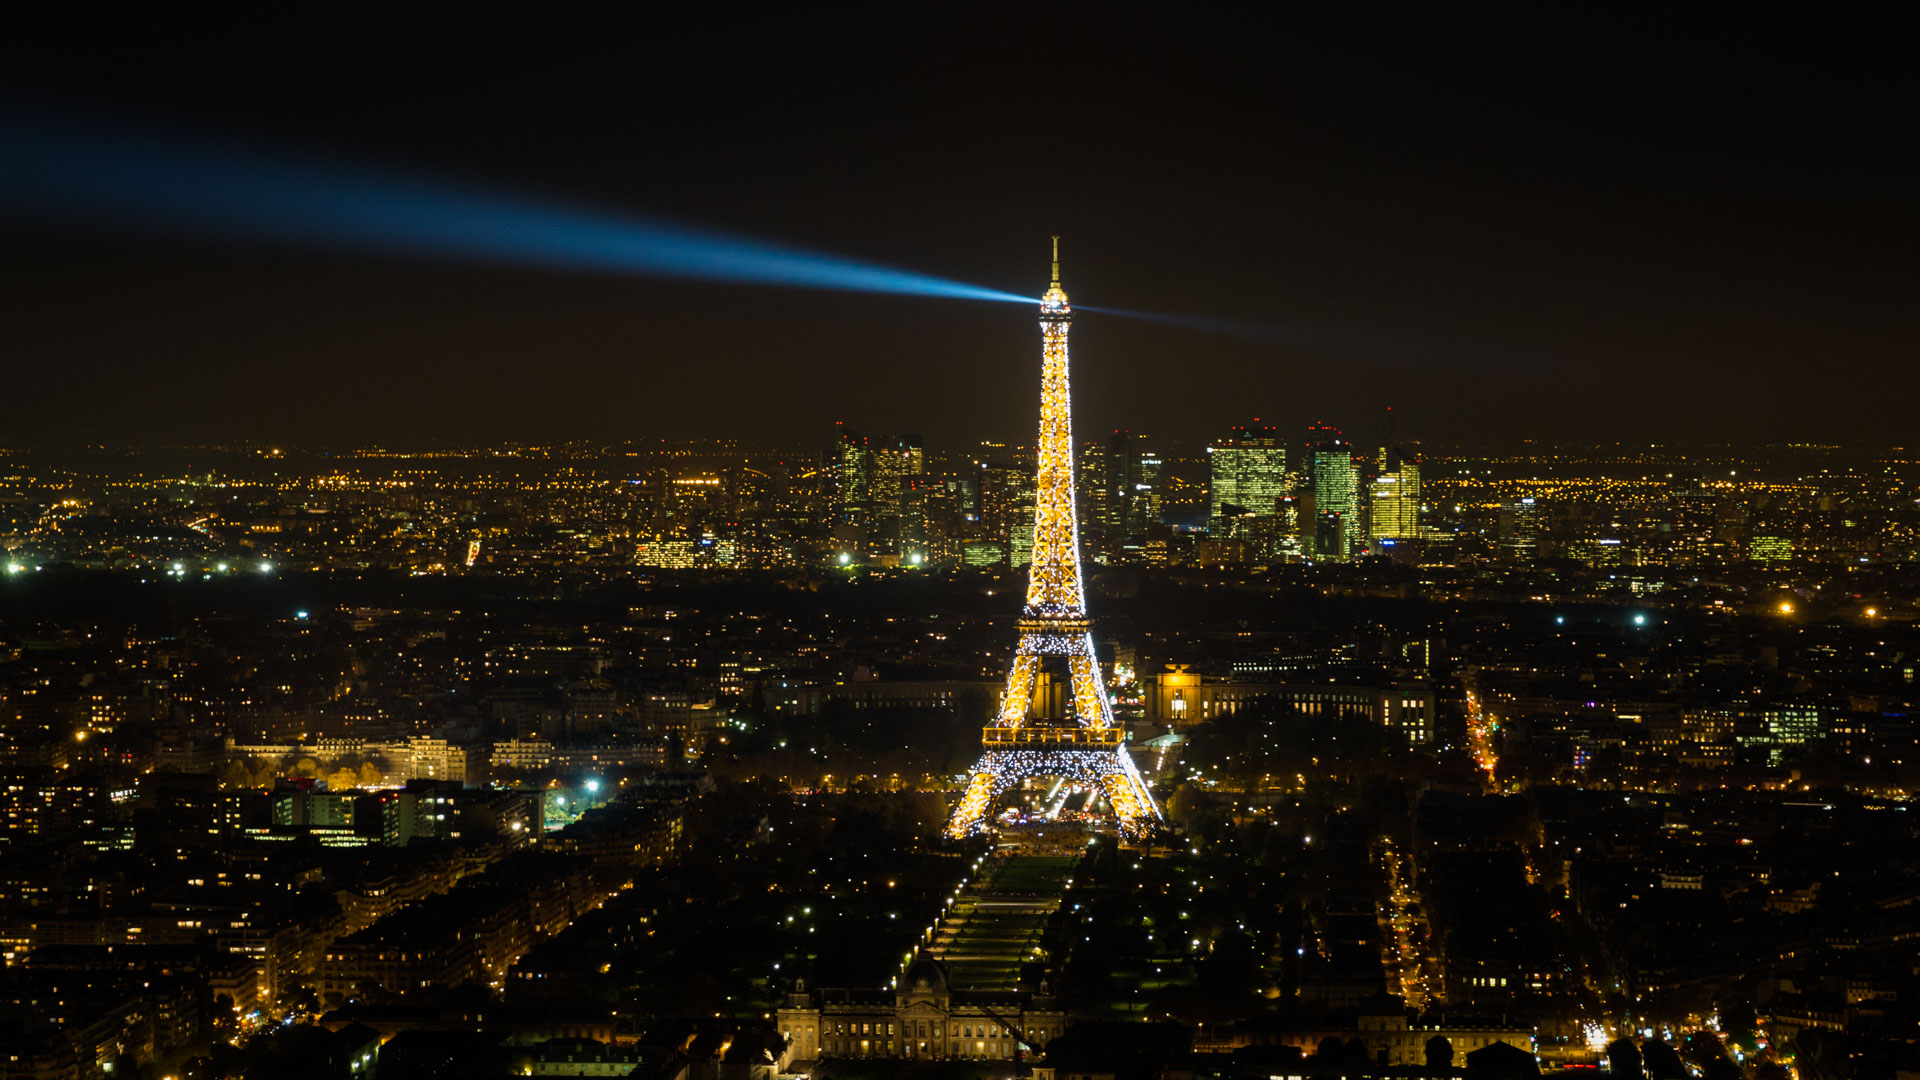 Paris - Montparnasse Tower | View to the Eiffel Tower